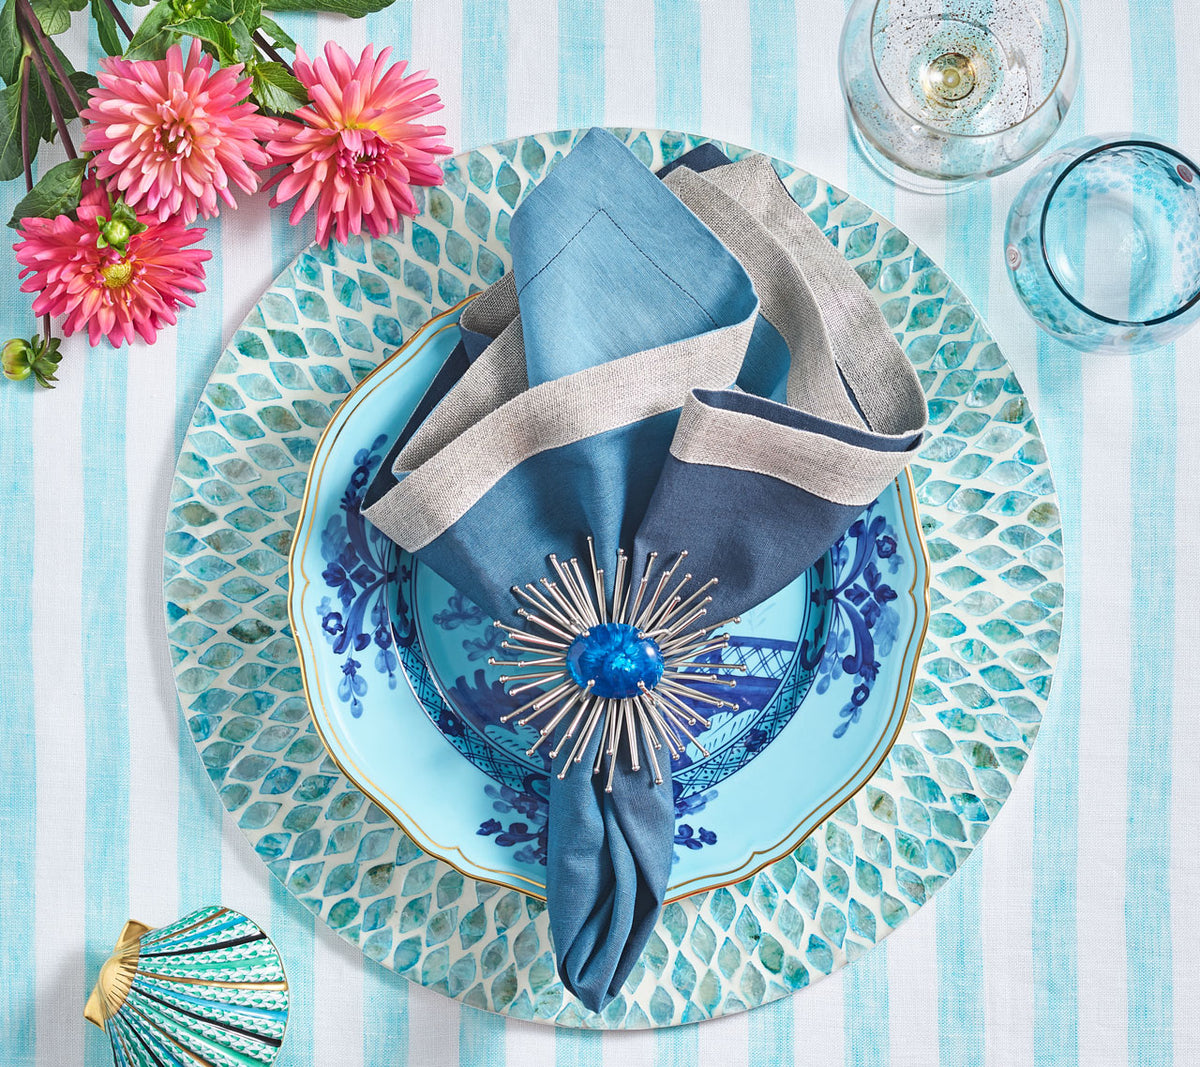 Seafoam Marquis Placemat underneath coordinating blue plates on seafoam & white striped tablecloth